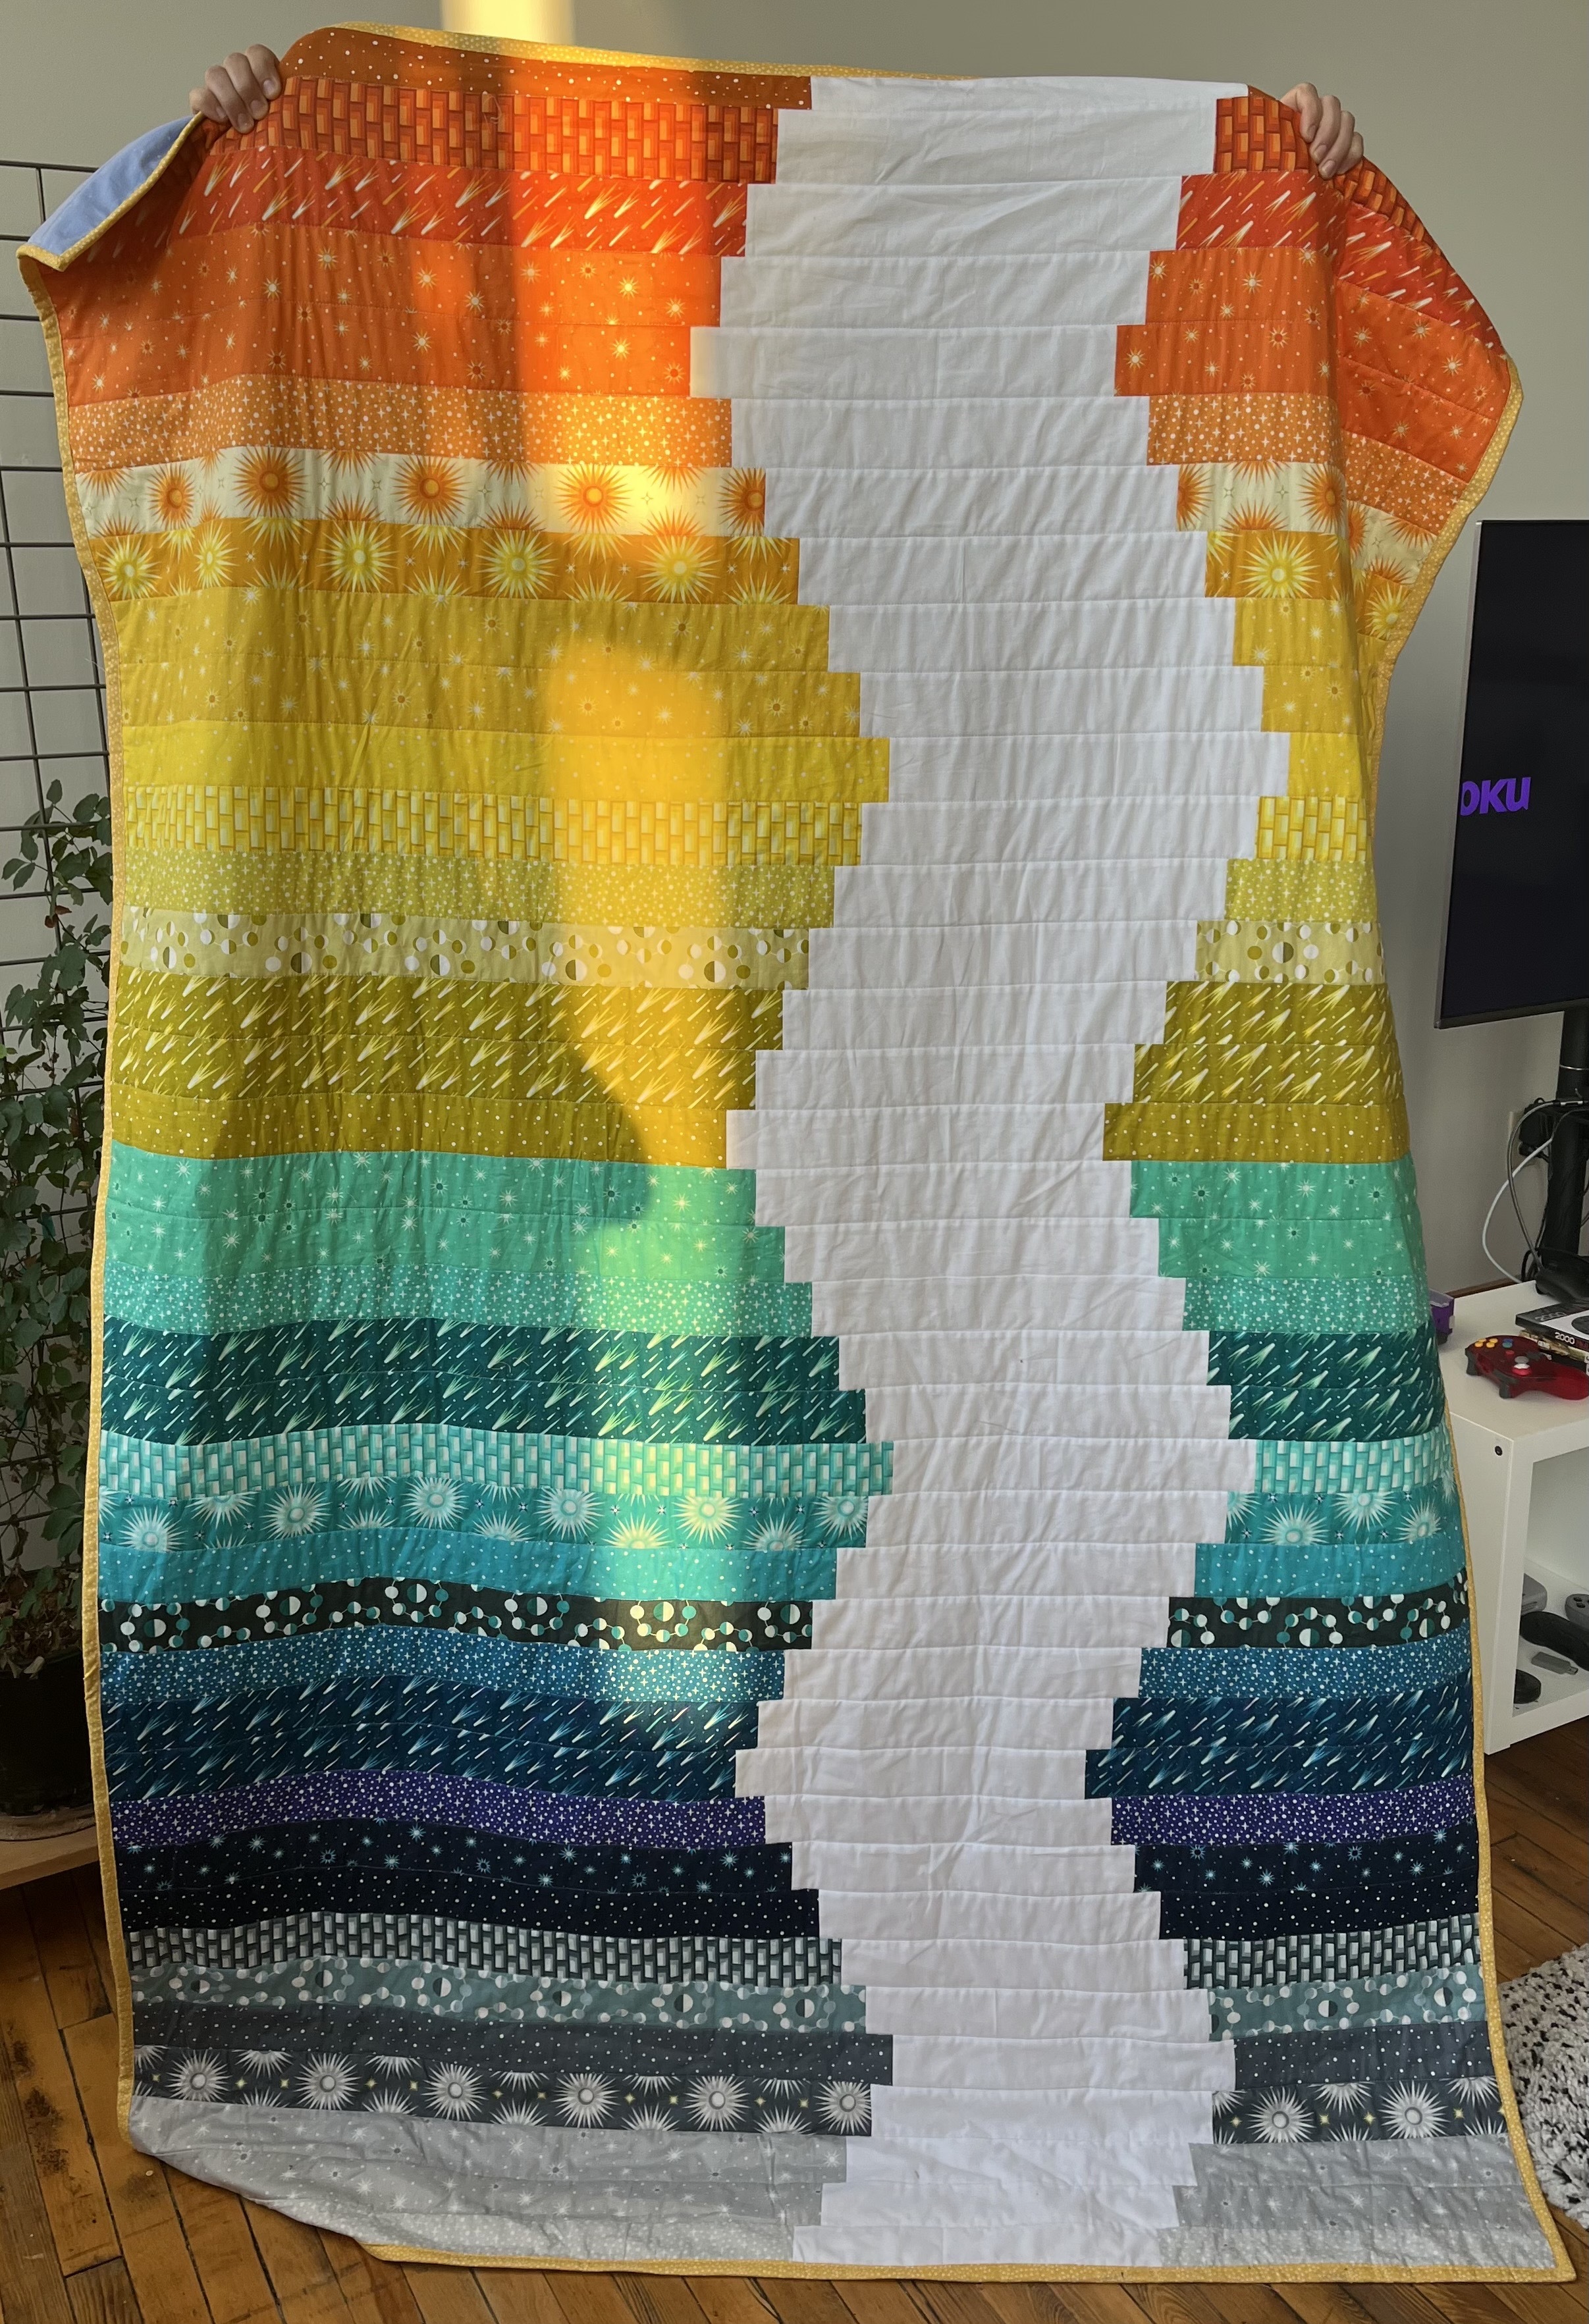 Here is my latest and greatest quilt project!